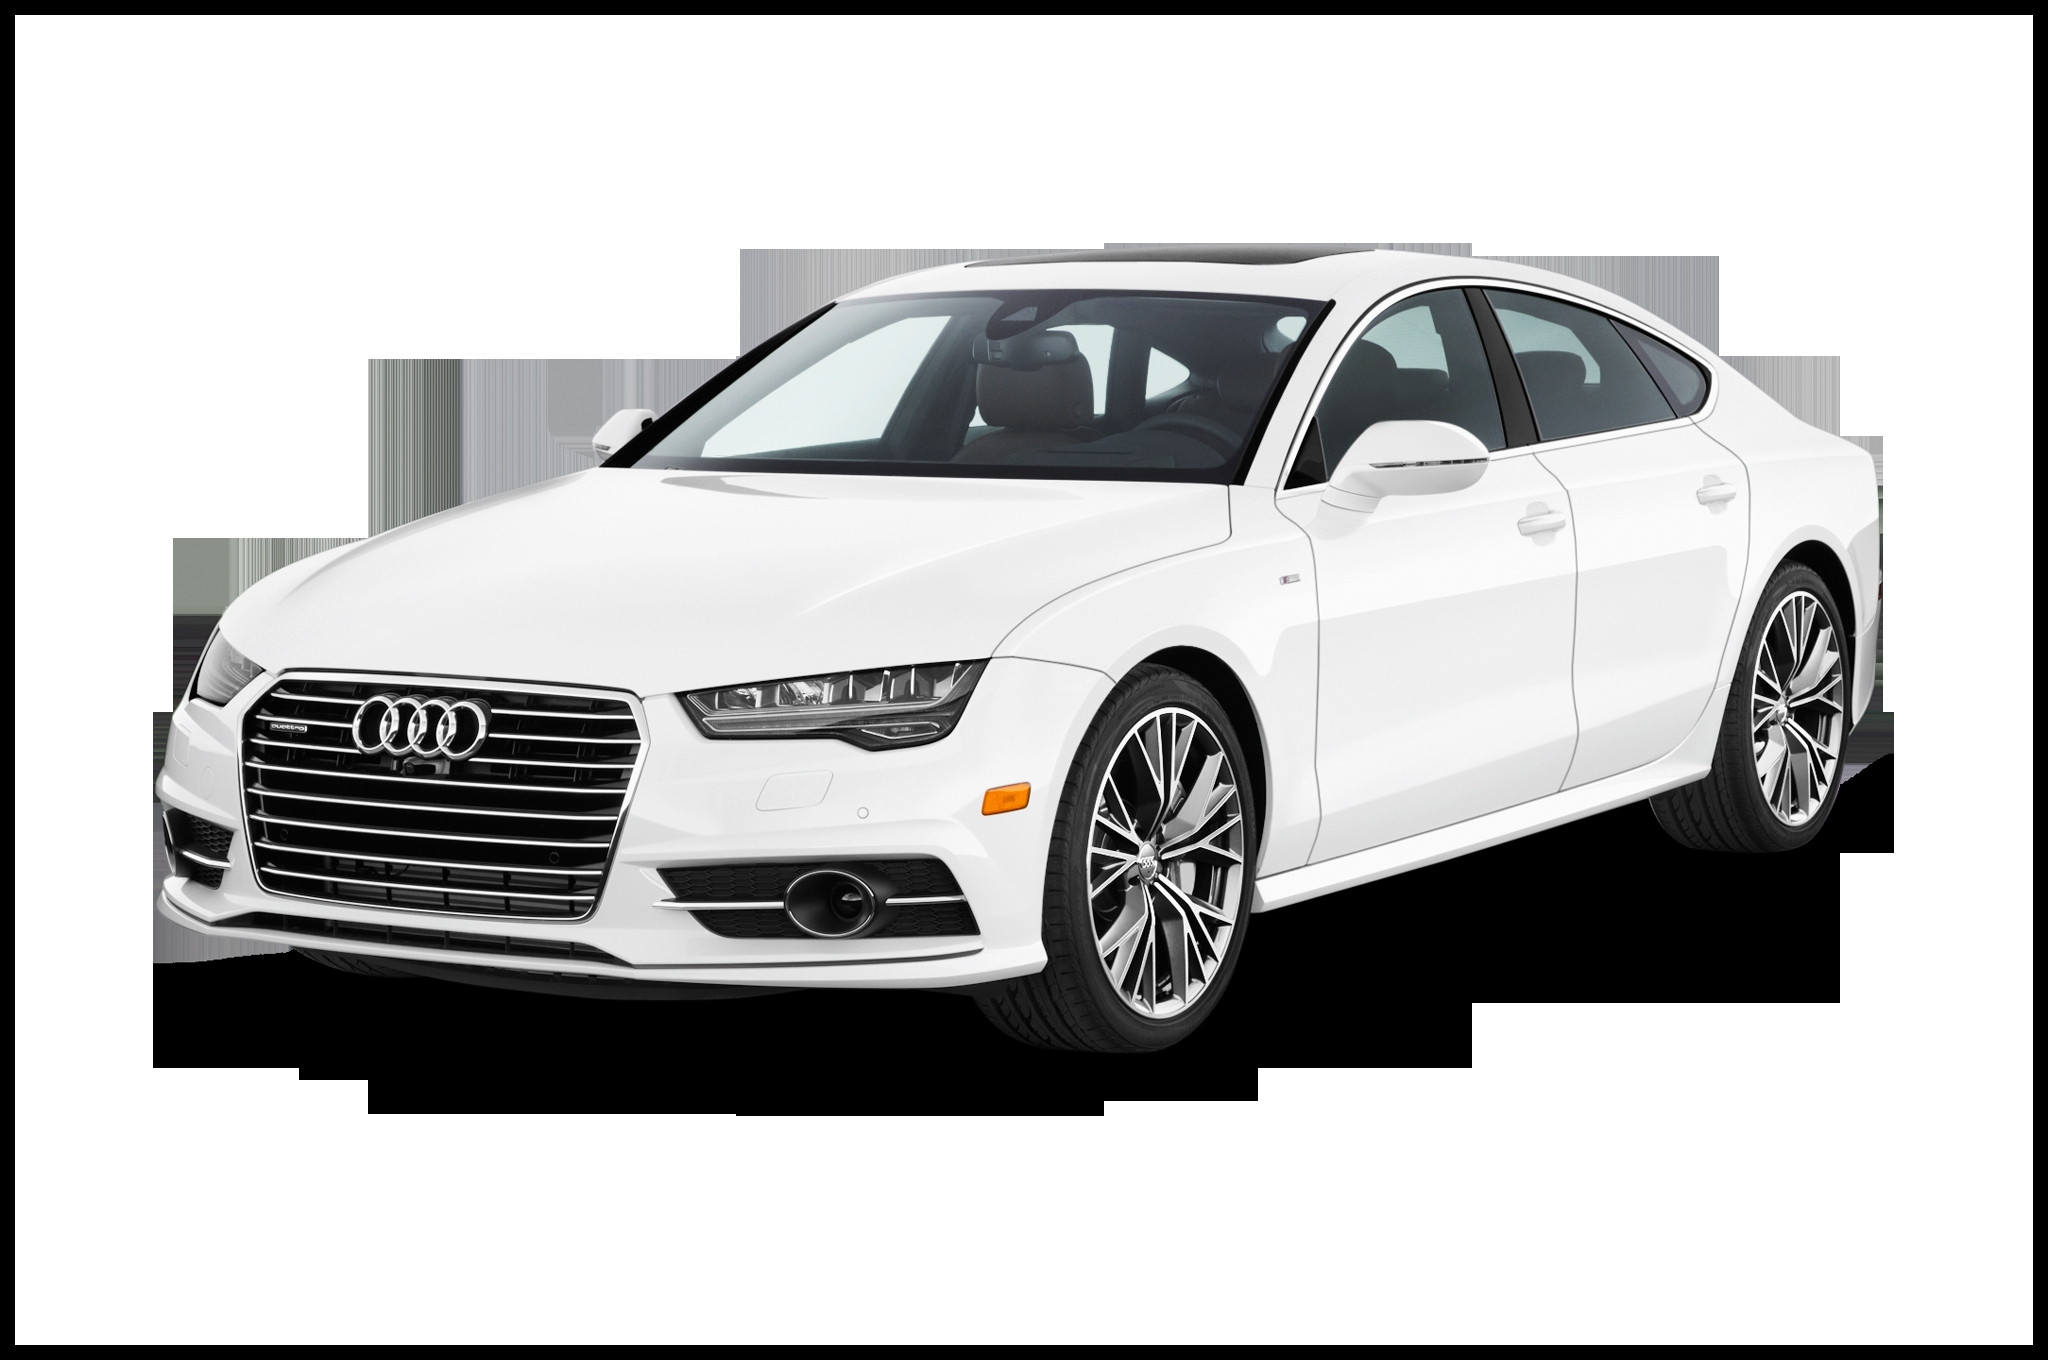 2 Door Audi A7 Lovely 2016 Audi A7 Reviews and Rating